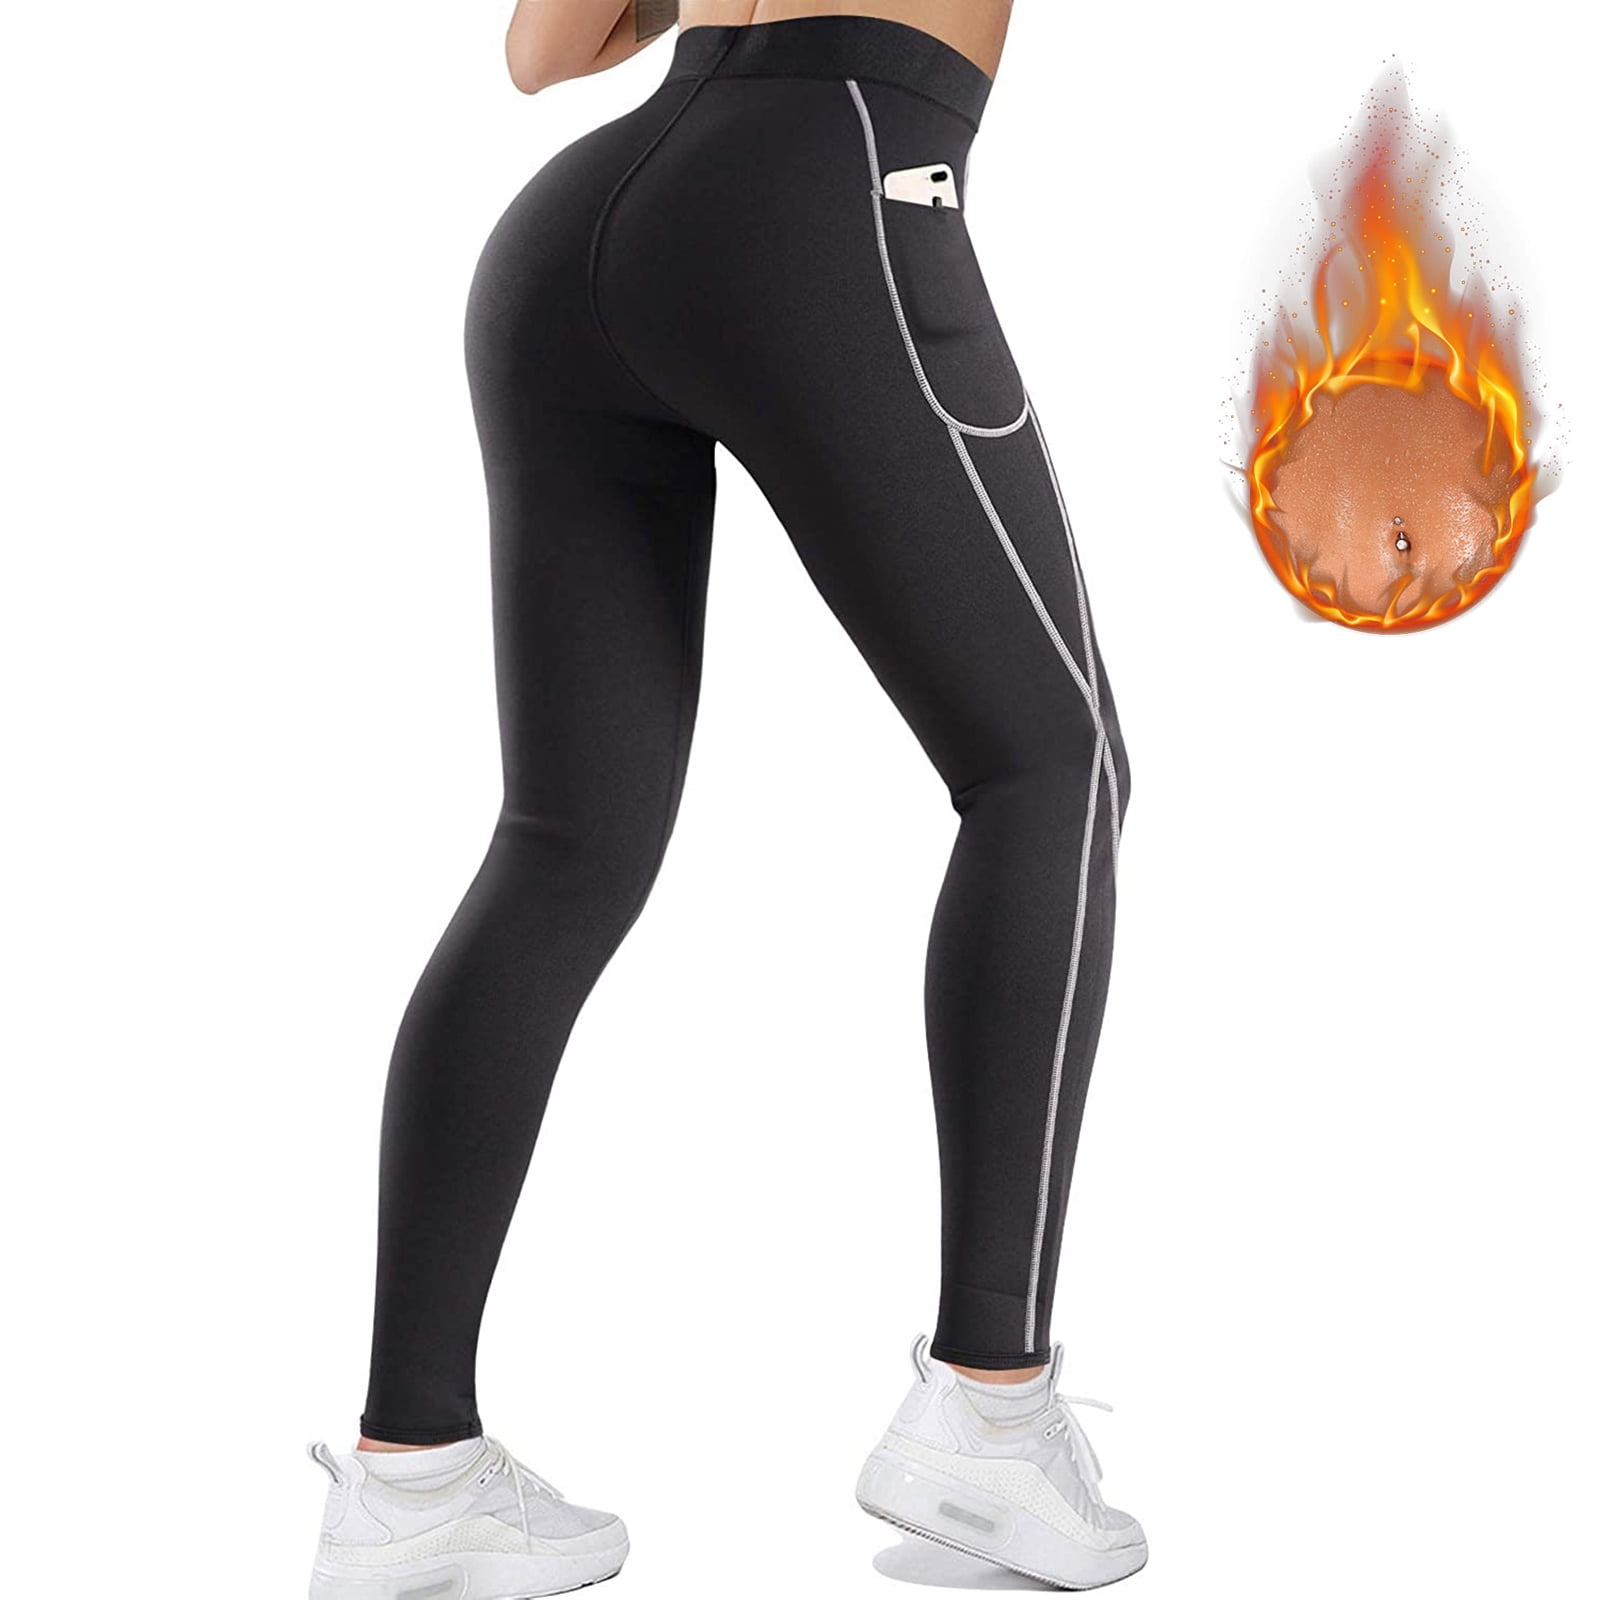 FitsT4 Womens Weight Loss Neoprene Hot Sauna Shorts Slimmer Sweat Thermo Pants with Mesh Crotch & Stylish Phone Pocket 